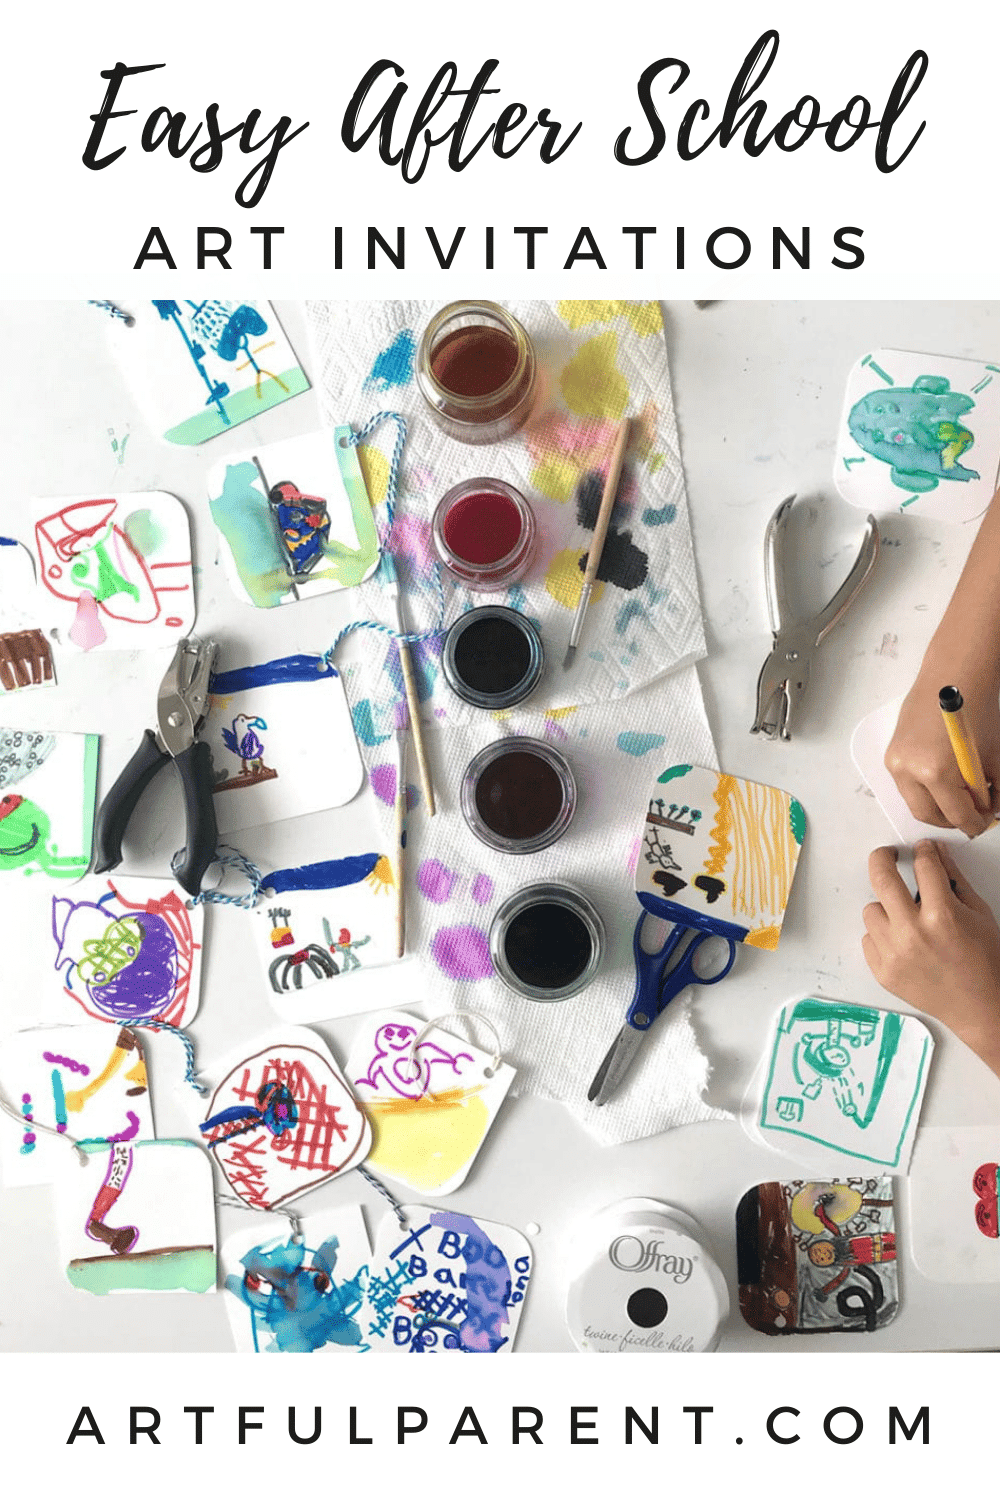 5 Easy After School Art Invitations for Kids